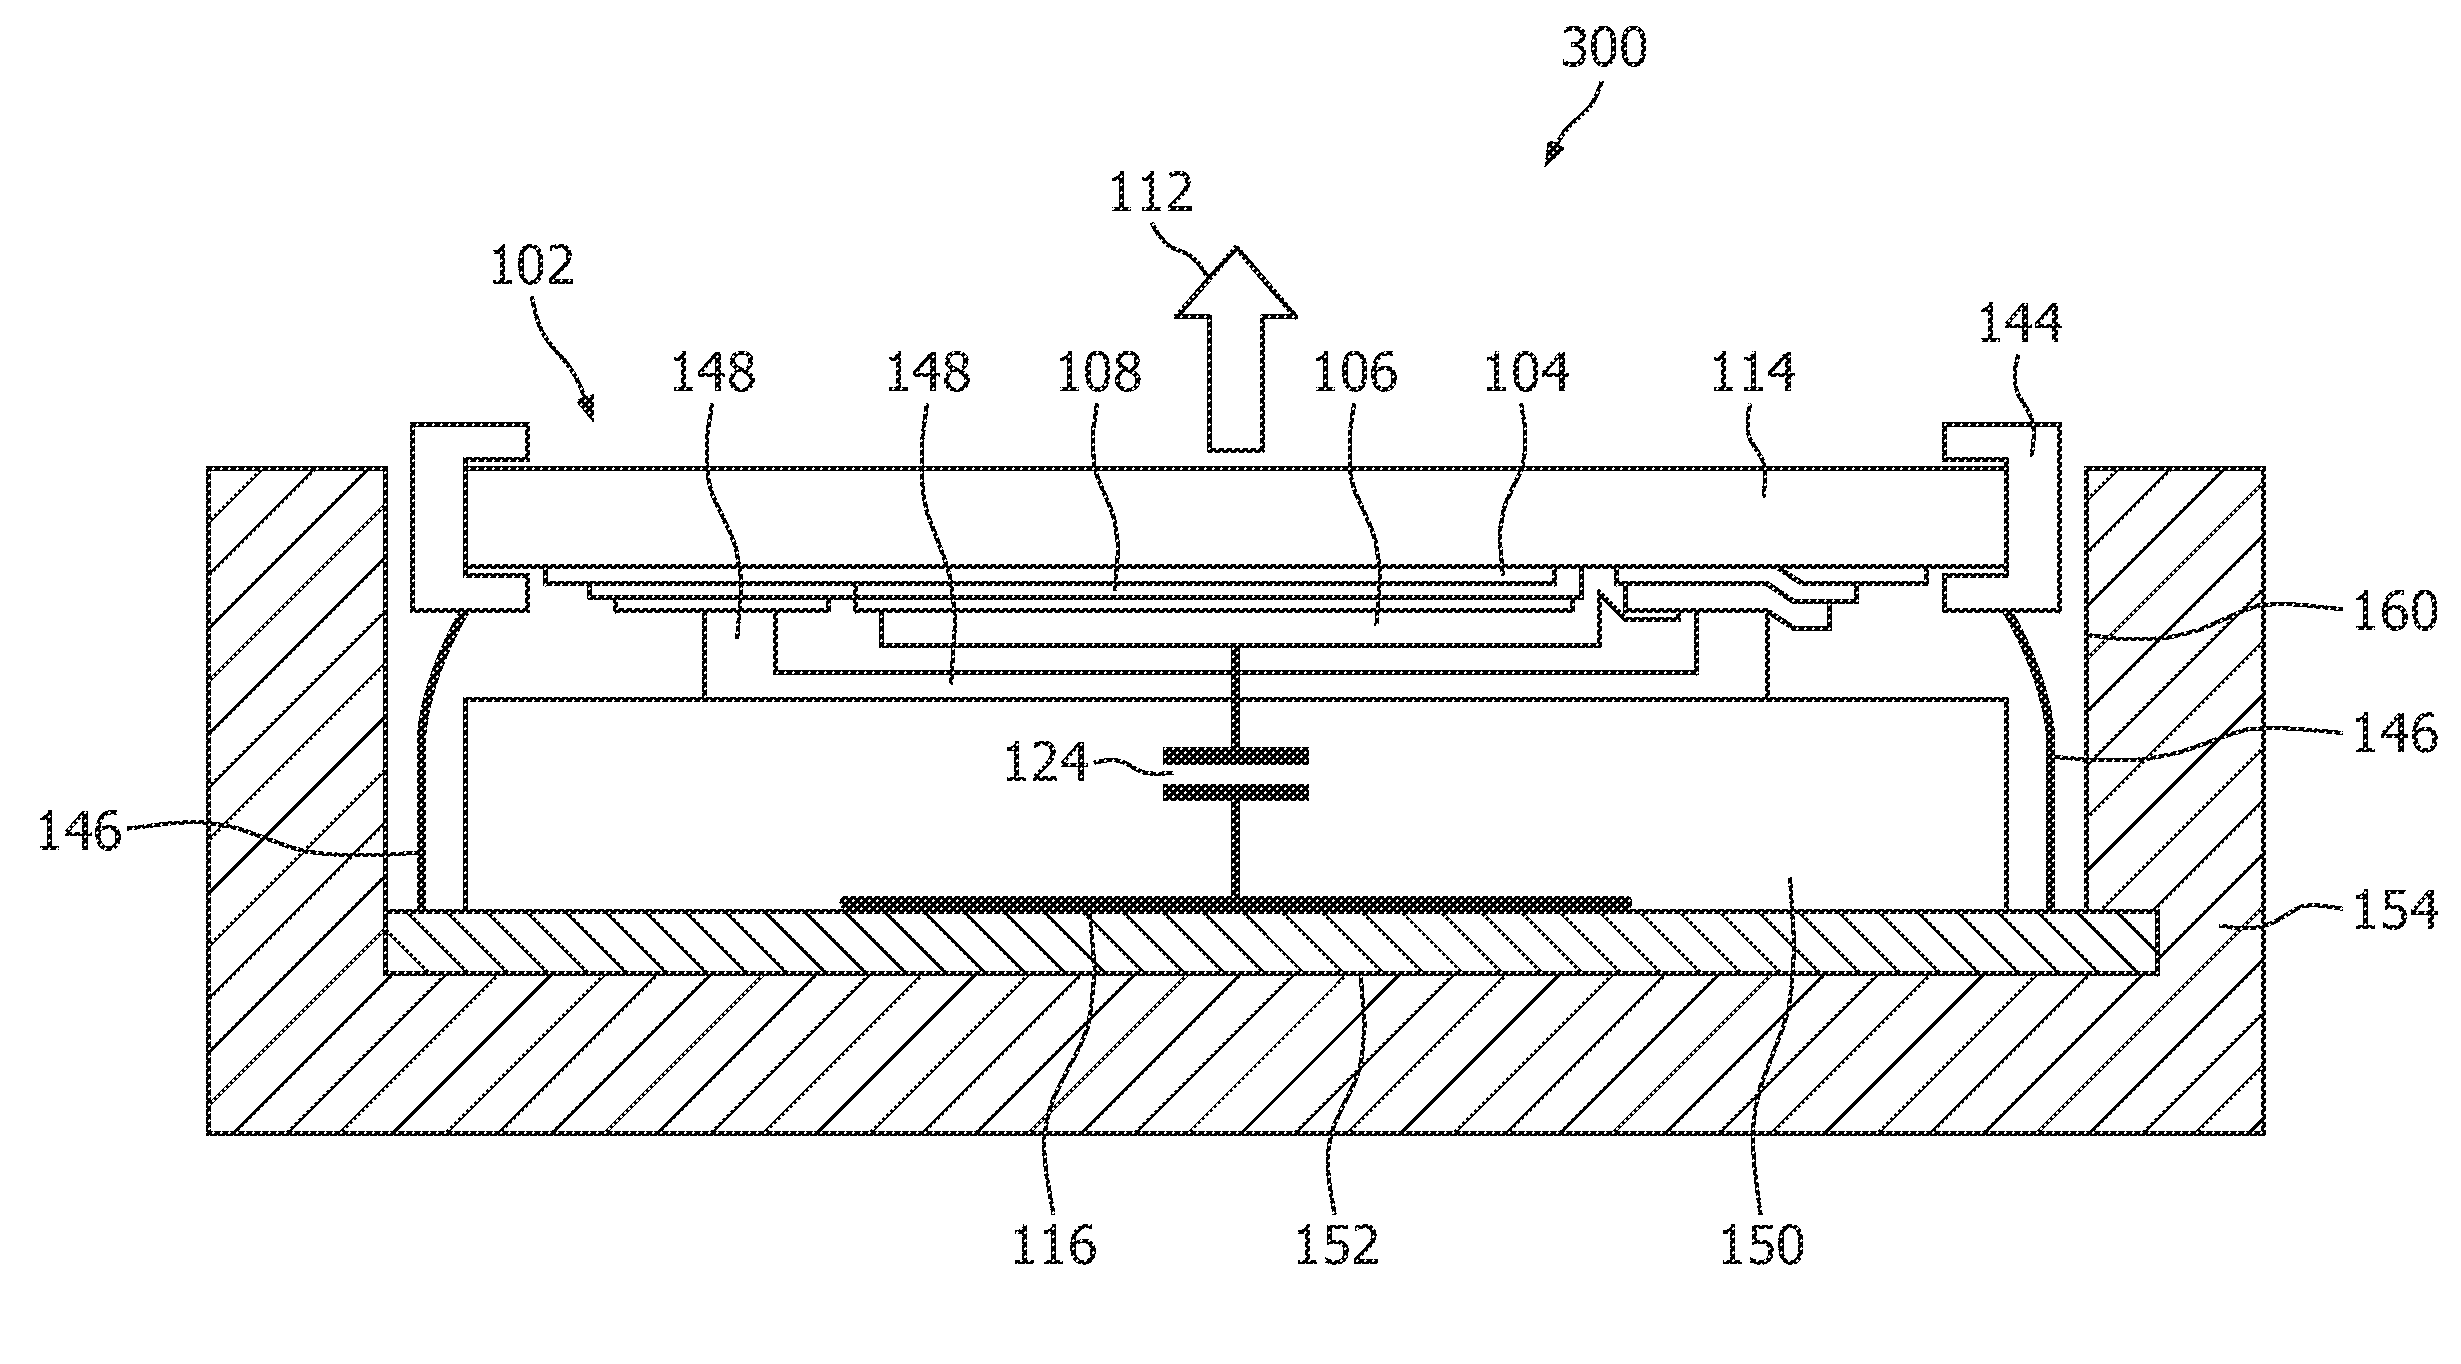 OLED device with capacitive proximity sensing means